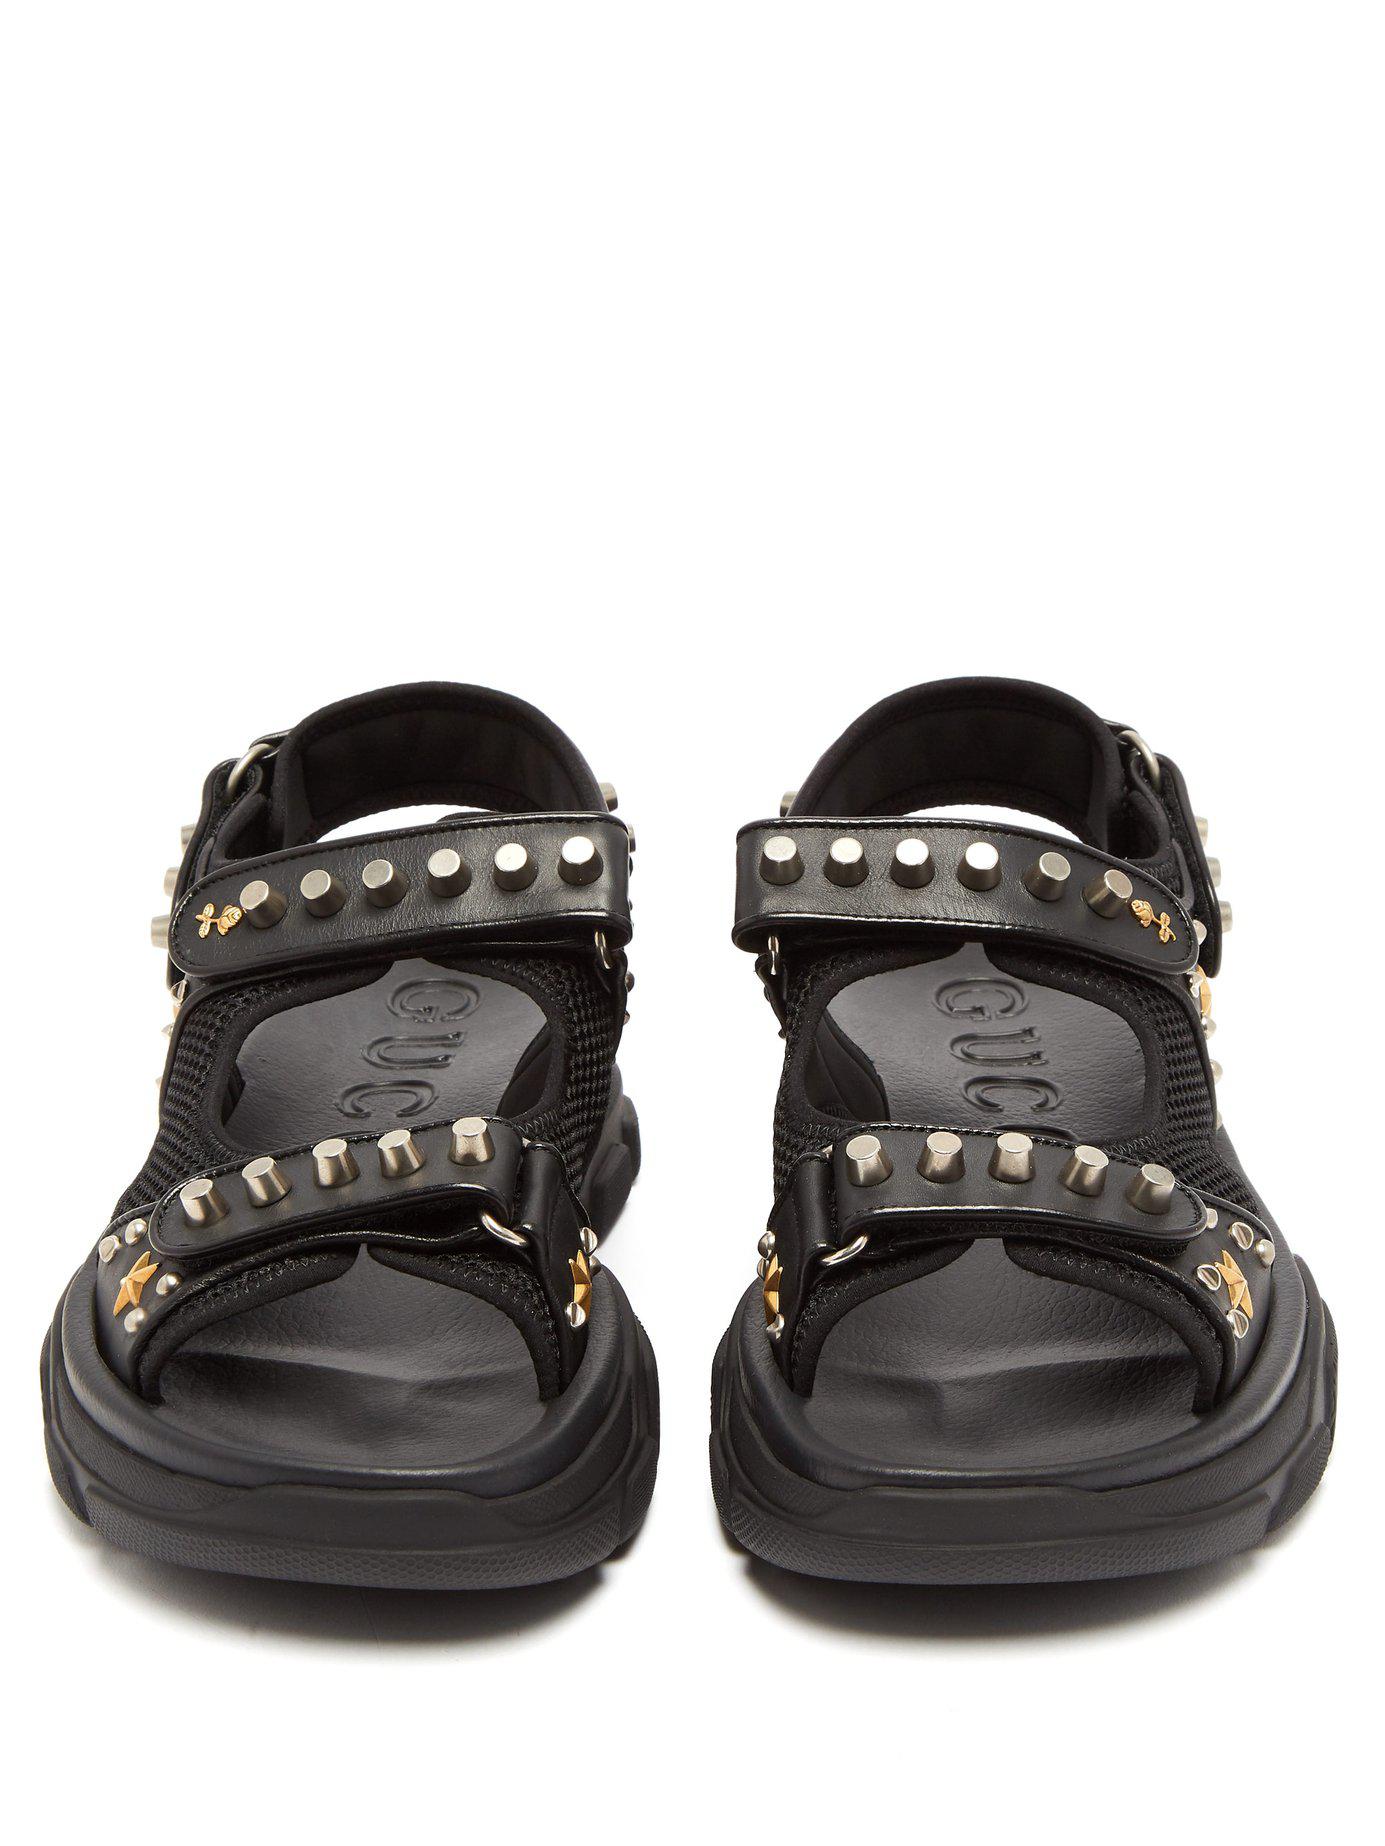 Lyst - Gucci Studded Leather & Mesh Sandals in Black for Men